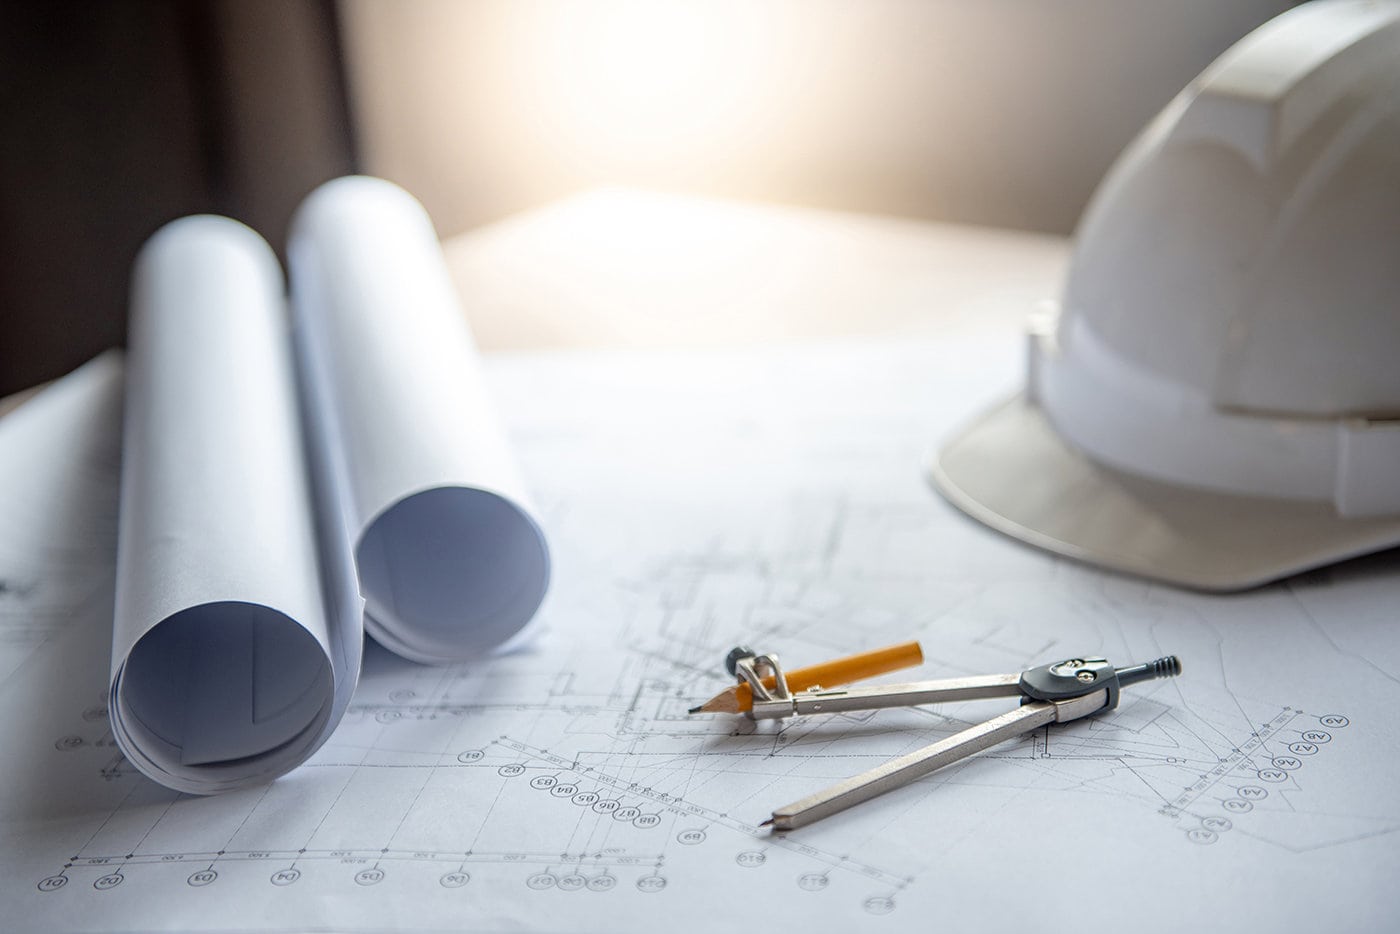 Blueprints, A Compass, And A White Hard Hat On A Table, Illuminated By Sunlight, Suggesting An Architectural Or Engineering Workspace.